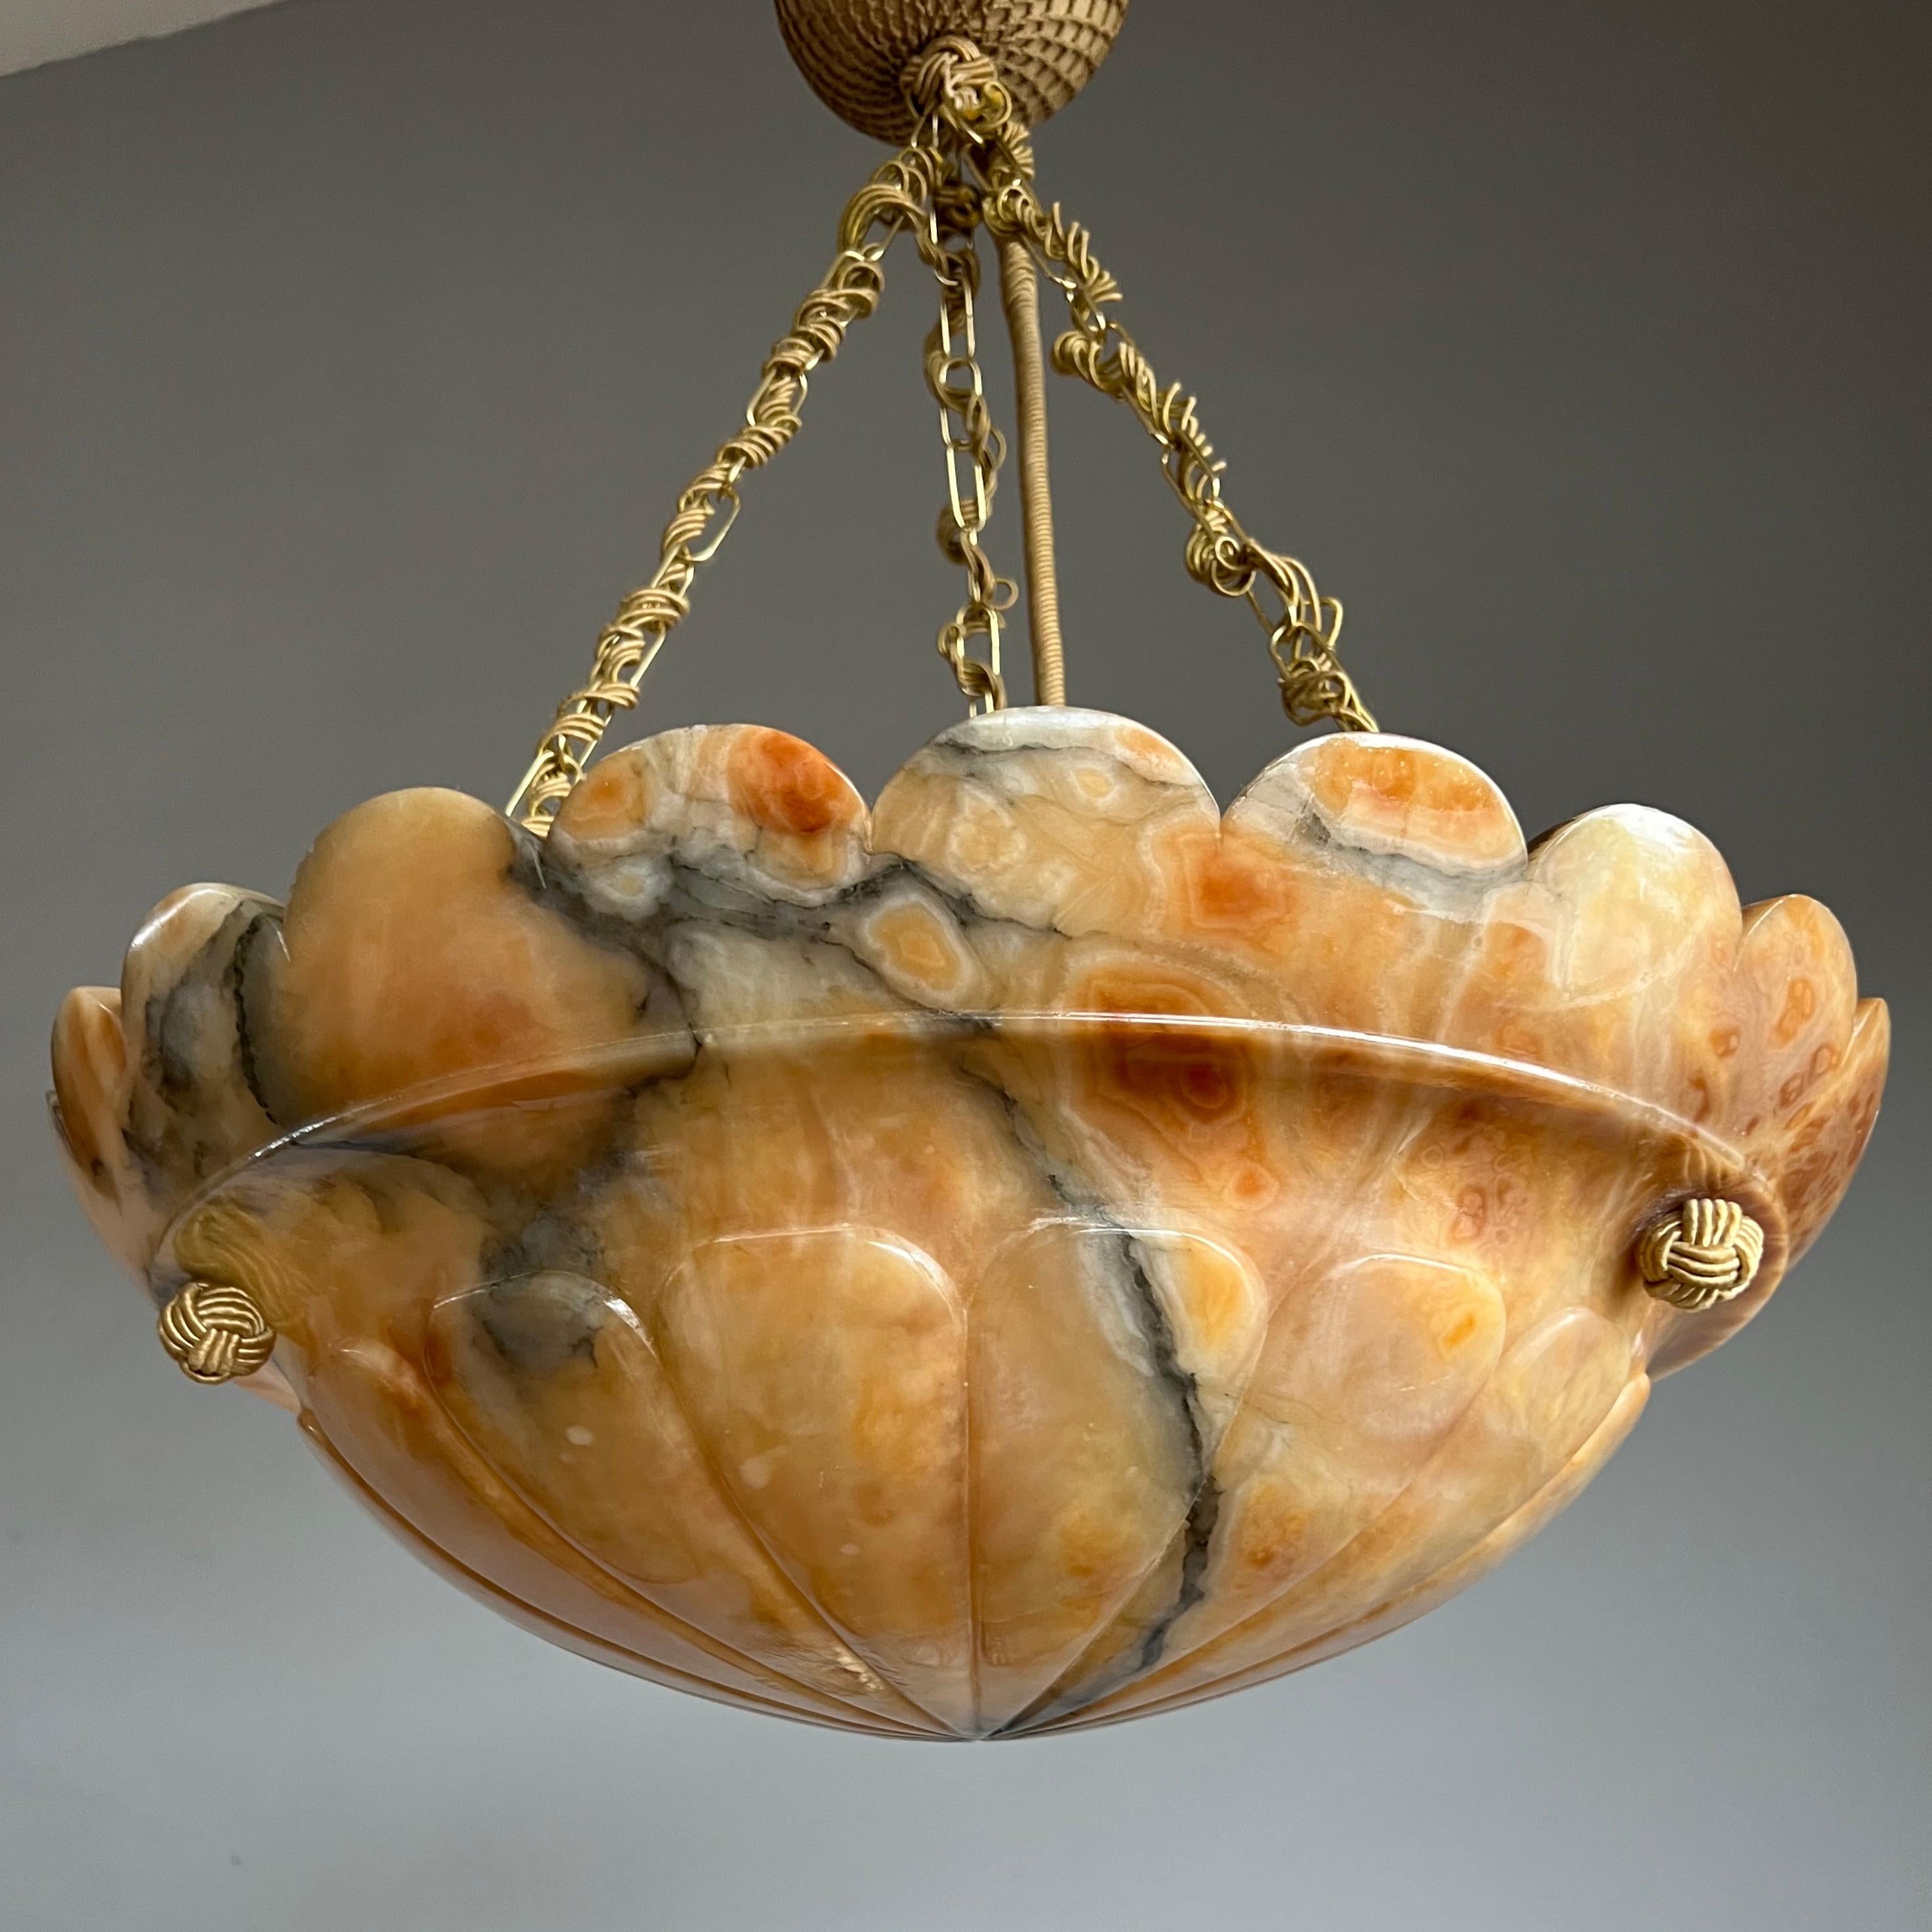 Stunning and large size antique ceiling fixture.

With early 20th century lighting as one of our specialities, we were again thrilled to find a unique Art Deco pendant made of the most striking alabaster imaginable. We have sold antique alabaster